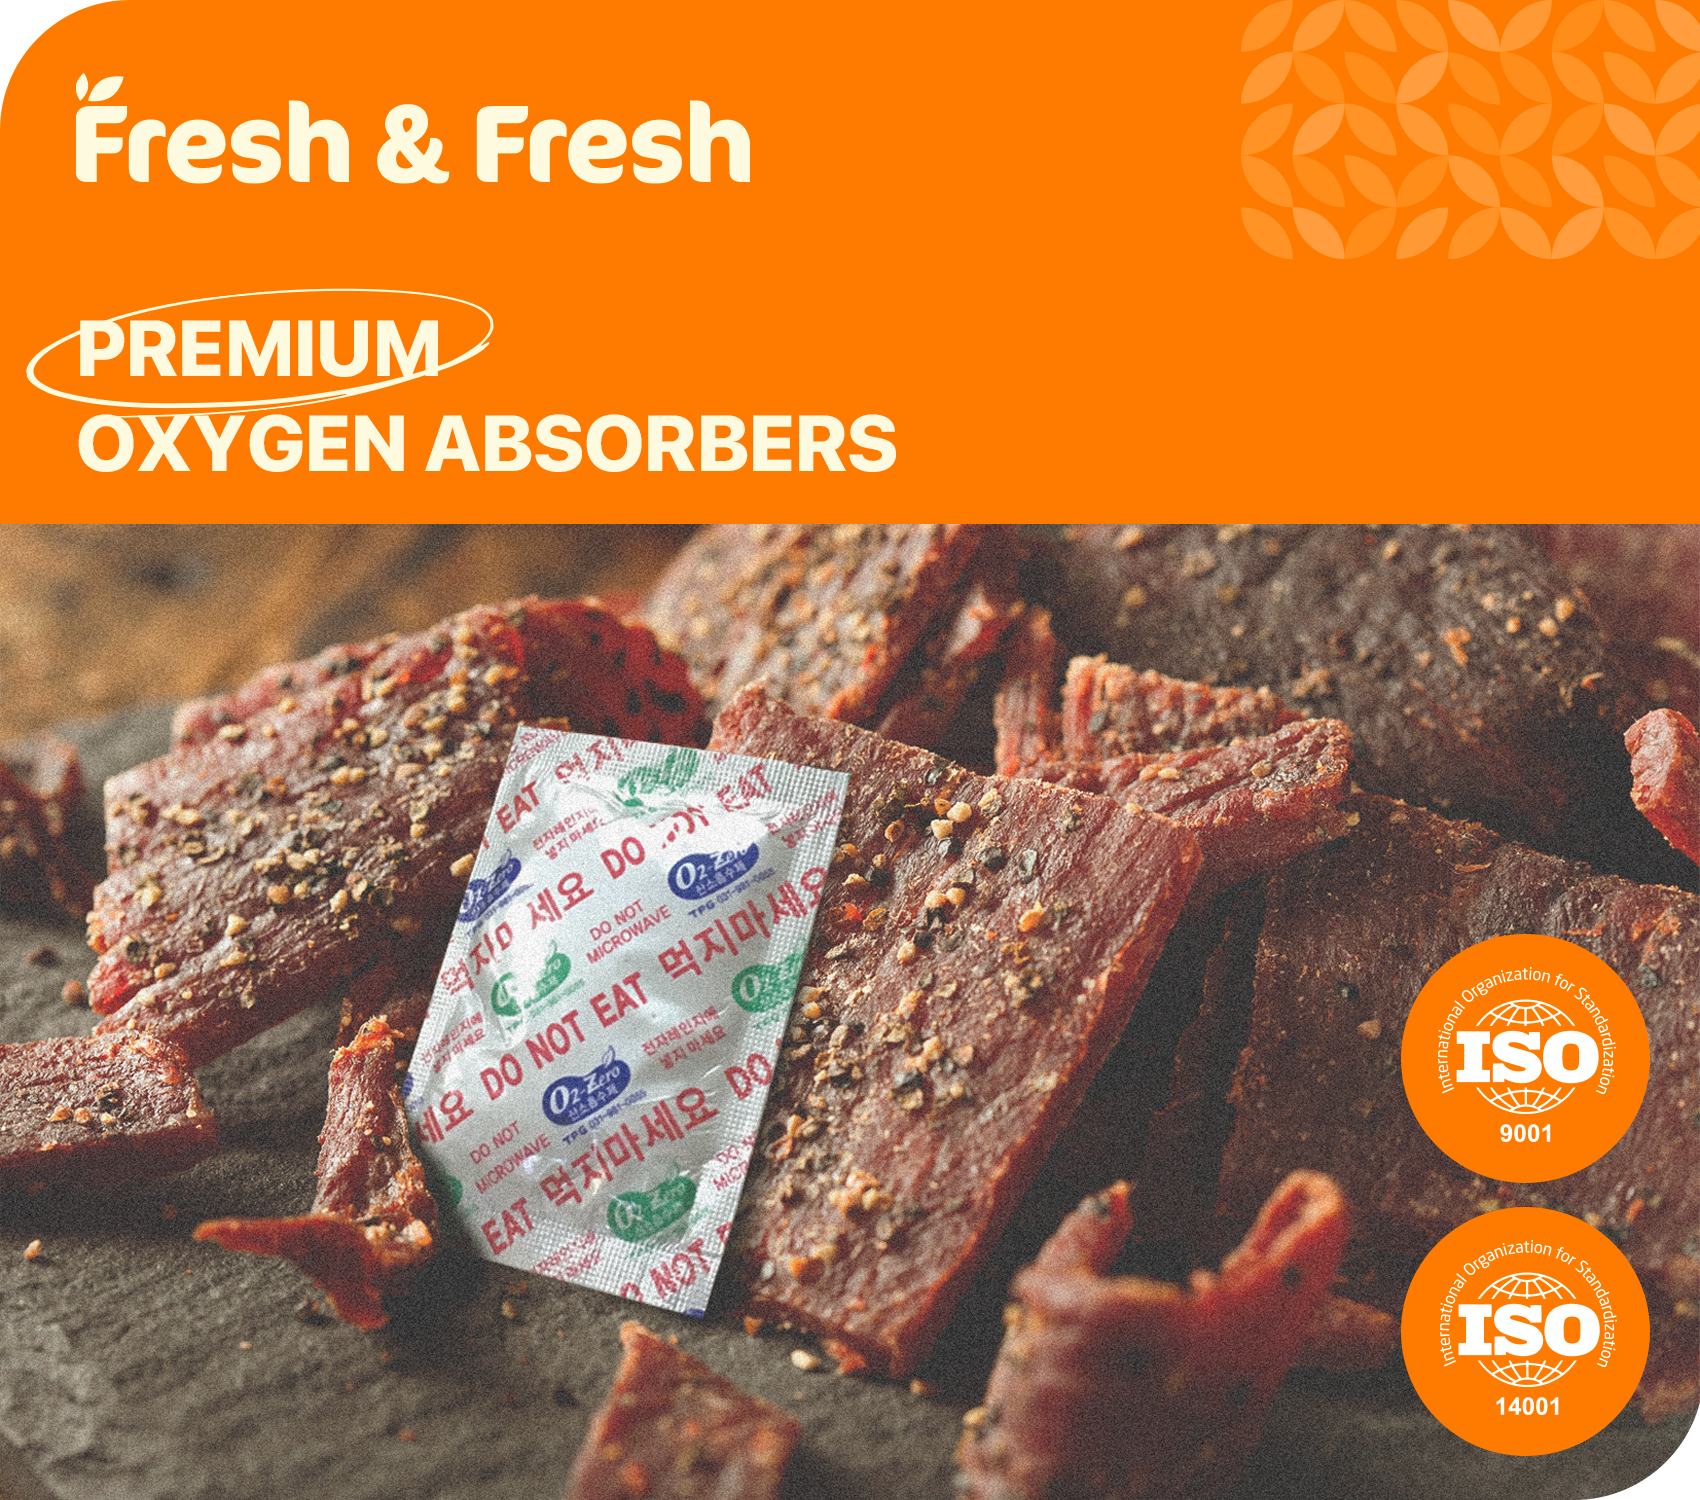 Fresh & Fresh (1890 Packs) 500 CC Premium Oxygen Absorbers(18 Bag of 105 Packets) - ISO 9001 & 14001 Certified Facility Manufactured